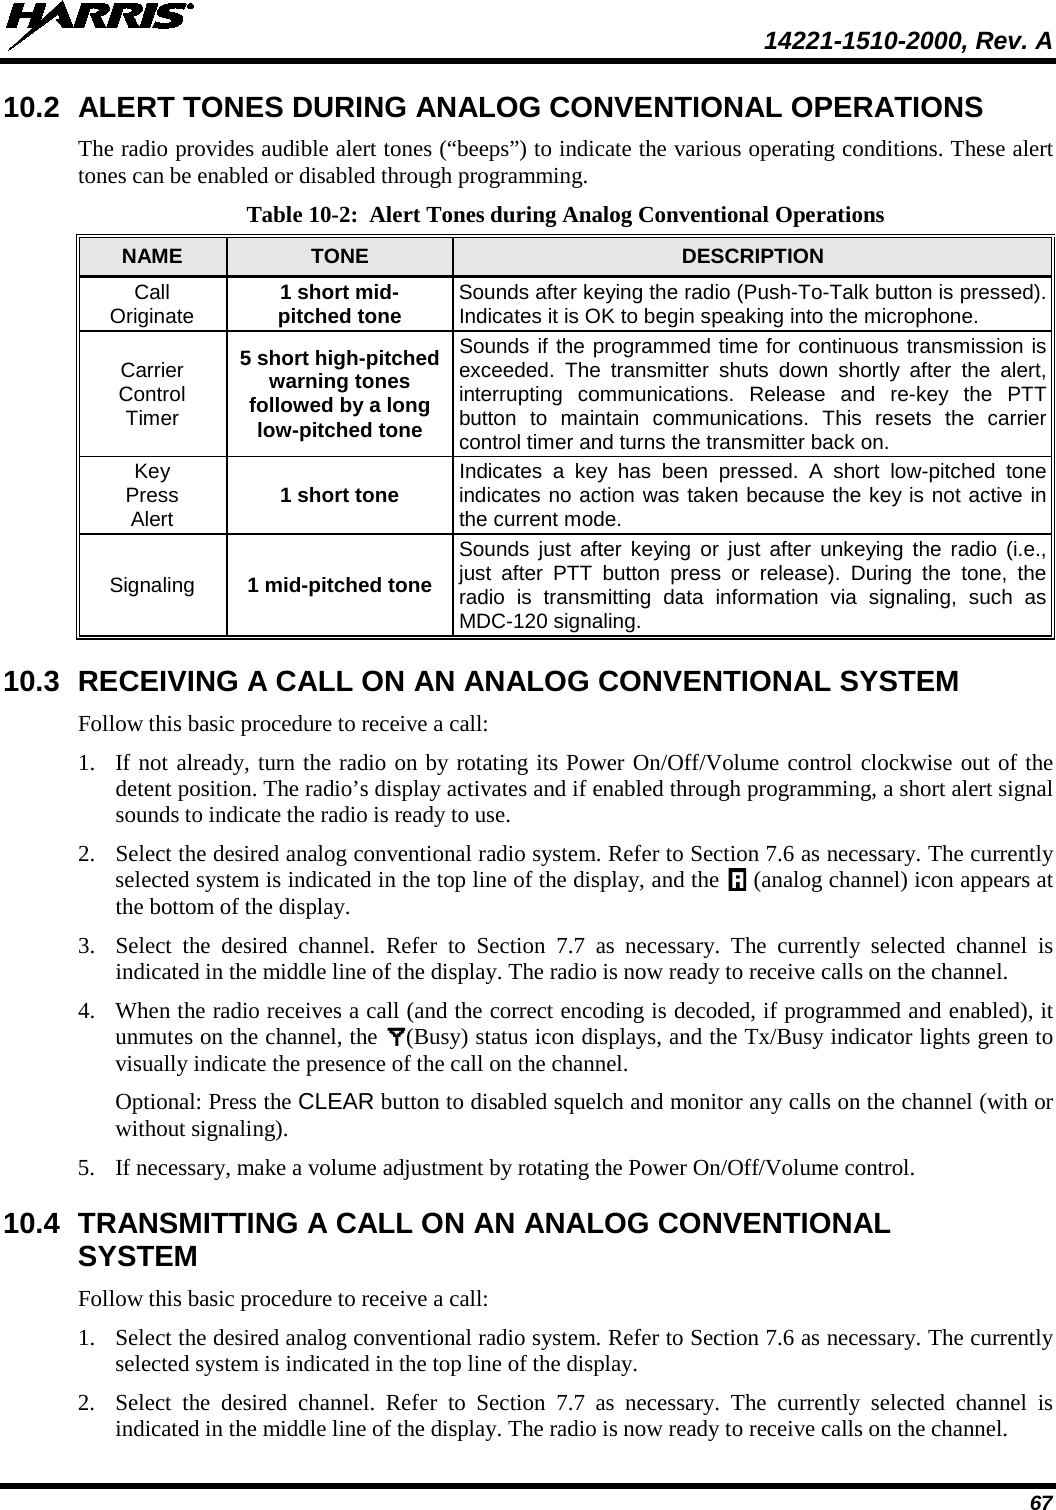  14221-1510-2000, Rev. A 67 10.2 ALERT TONES DURING ANALOG CONVENTIONAL OPERATIONS The radio provides audible alert tones (“beeps”) to indicate the various operating conditions. These alert tones can be enabled or disabled through programming. Table 10-2:  Alert Tones during Analog Conventional Operations  NAME TONE DESCRIPTION Call Originate 1 short mid- pitched tone Sounds after keying the radio (Push-To-Talk button is pressed). Indicates it is OK to begin speaking into the microphone. Carrier Control Timer 5 short high-pitched warning tones followed by a long low-pitched tone Sounds if the programmed time for continuous transmission is exceeded. The transmitter shuts down shortly after the alert, interrupting communications. Release and re-key the PTT button to maintain communications. This resets the carrier control timer and turns the transmitter back on. Key Press Alert 1 short tone Indicates a key has been pressed. A short low-pitched tone indicates no action was taken because the key is not active in the current mode. Signaling 1 mid-pitched tone Sounds just after keying or just after unkeying the radio (i.e., just after PTT button press or release). During the tone, the radio is transmitting data information via signaling, such as MDC-120 signaling. 10.3 RECEIVING A CALL ON AN ANALOG CONVENTIONAL SYSTEM Follow this basic procedure to receive a call: 1. If not already, turn the radio on by rotating its Power On/Off/Volume control clockwise out of the detent position. The radio’s display activates and if enabled through programming, a short alert signal sounds to indicate the radio is ready to use. 2. Select the desired analog conventional radio system. Refer to Section 7.6 as necessary. The currently selected system is indicated in the top line of the display, and the   (analog channel) icon appears at the bottom of the display. 3. Select the desired channel. Refer to Section 7.7  as necessary. The currently selected channel is indicated in the middle line of the display. The radio is now ready to receive calls on the channel. 4. When the radio receives a call (and the correct encoding is decoded, if programmed and enabled), it unmutes on the channel, the  (Busy) status icon displays, and the Tx/Busy indicator lights green to visually indicate the presence of the call on the channel. Optional: Press the CLEAR button to disabled squelch and monitor any calls on the channel (with or without signaling). 5. If necessary, make a volume adjustment by rotating the Power On/Off/Volume control. 10.4 TRANSMITTING A CALL ON AN ANALOG CONVENTIONAL SYSTEM Follow this basic procedure to receive a call: 1. Select the desired analog conventional radio system. Refer to Section 7.6 as necessary. The currently selected system is indicated in the top line of the display. 2. Select the desired channel. Refer to Section 7.7  as necessary. The currently selected channel is indicated in the middle line of the display. The radio is now ready to receive calls on the channel. 